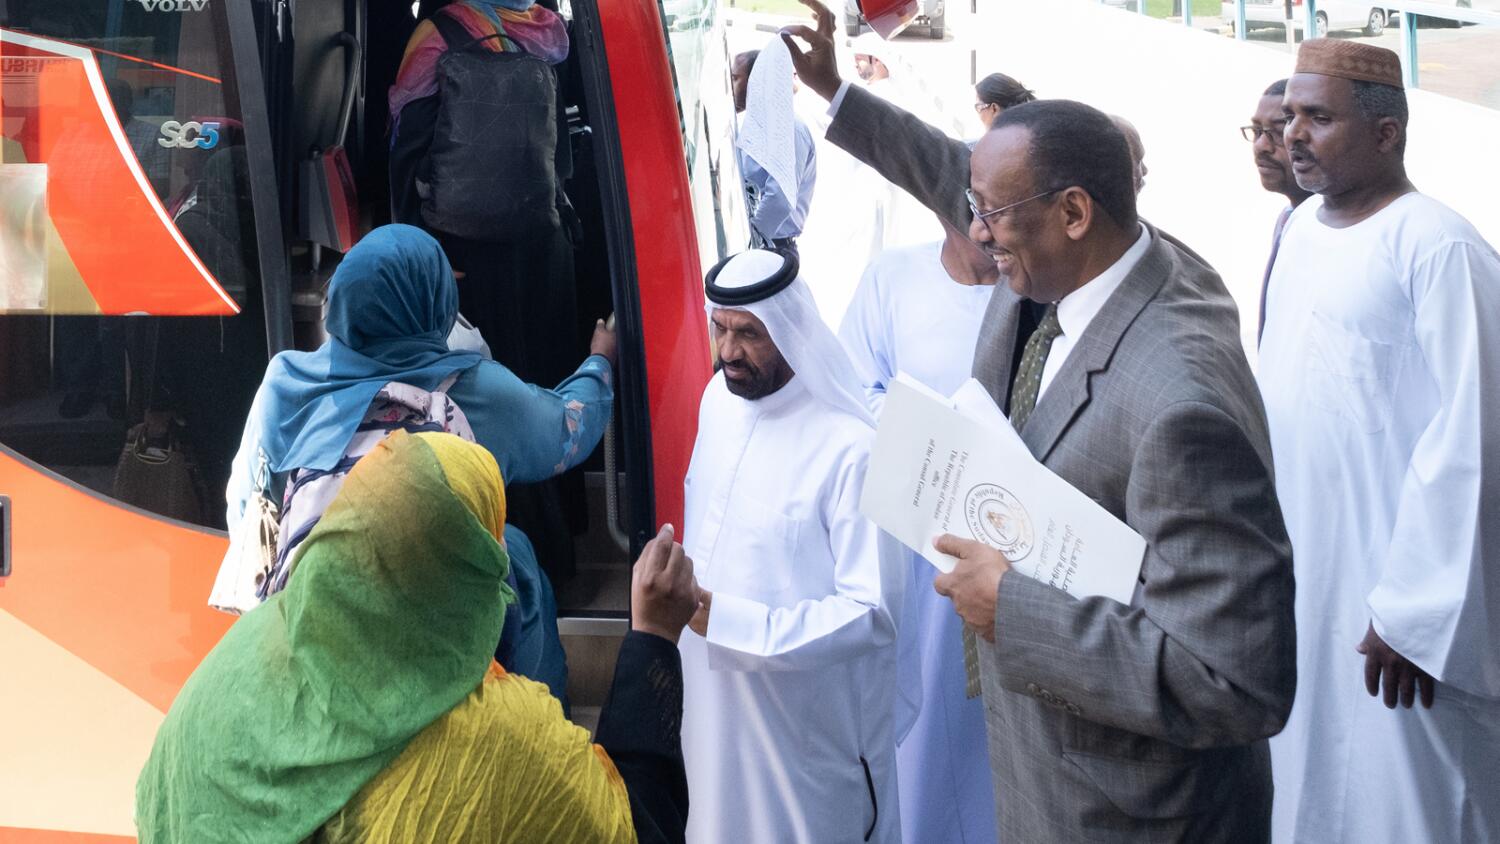 Dubai's Islamic Affairs and Charitable Activities Department and the Mohammed Bin Rashid Al Maktoum Charity and Humanitarian Establishment provide support to Sudanese nationals until they can safely return to their country. — Wam